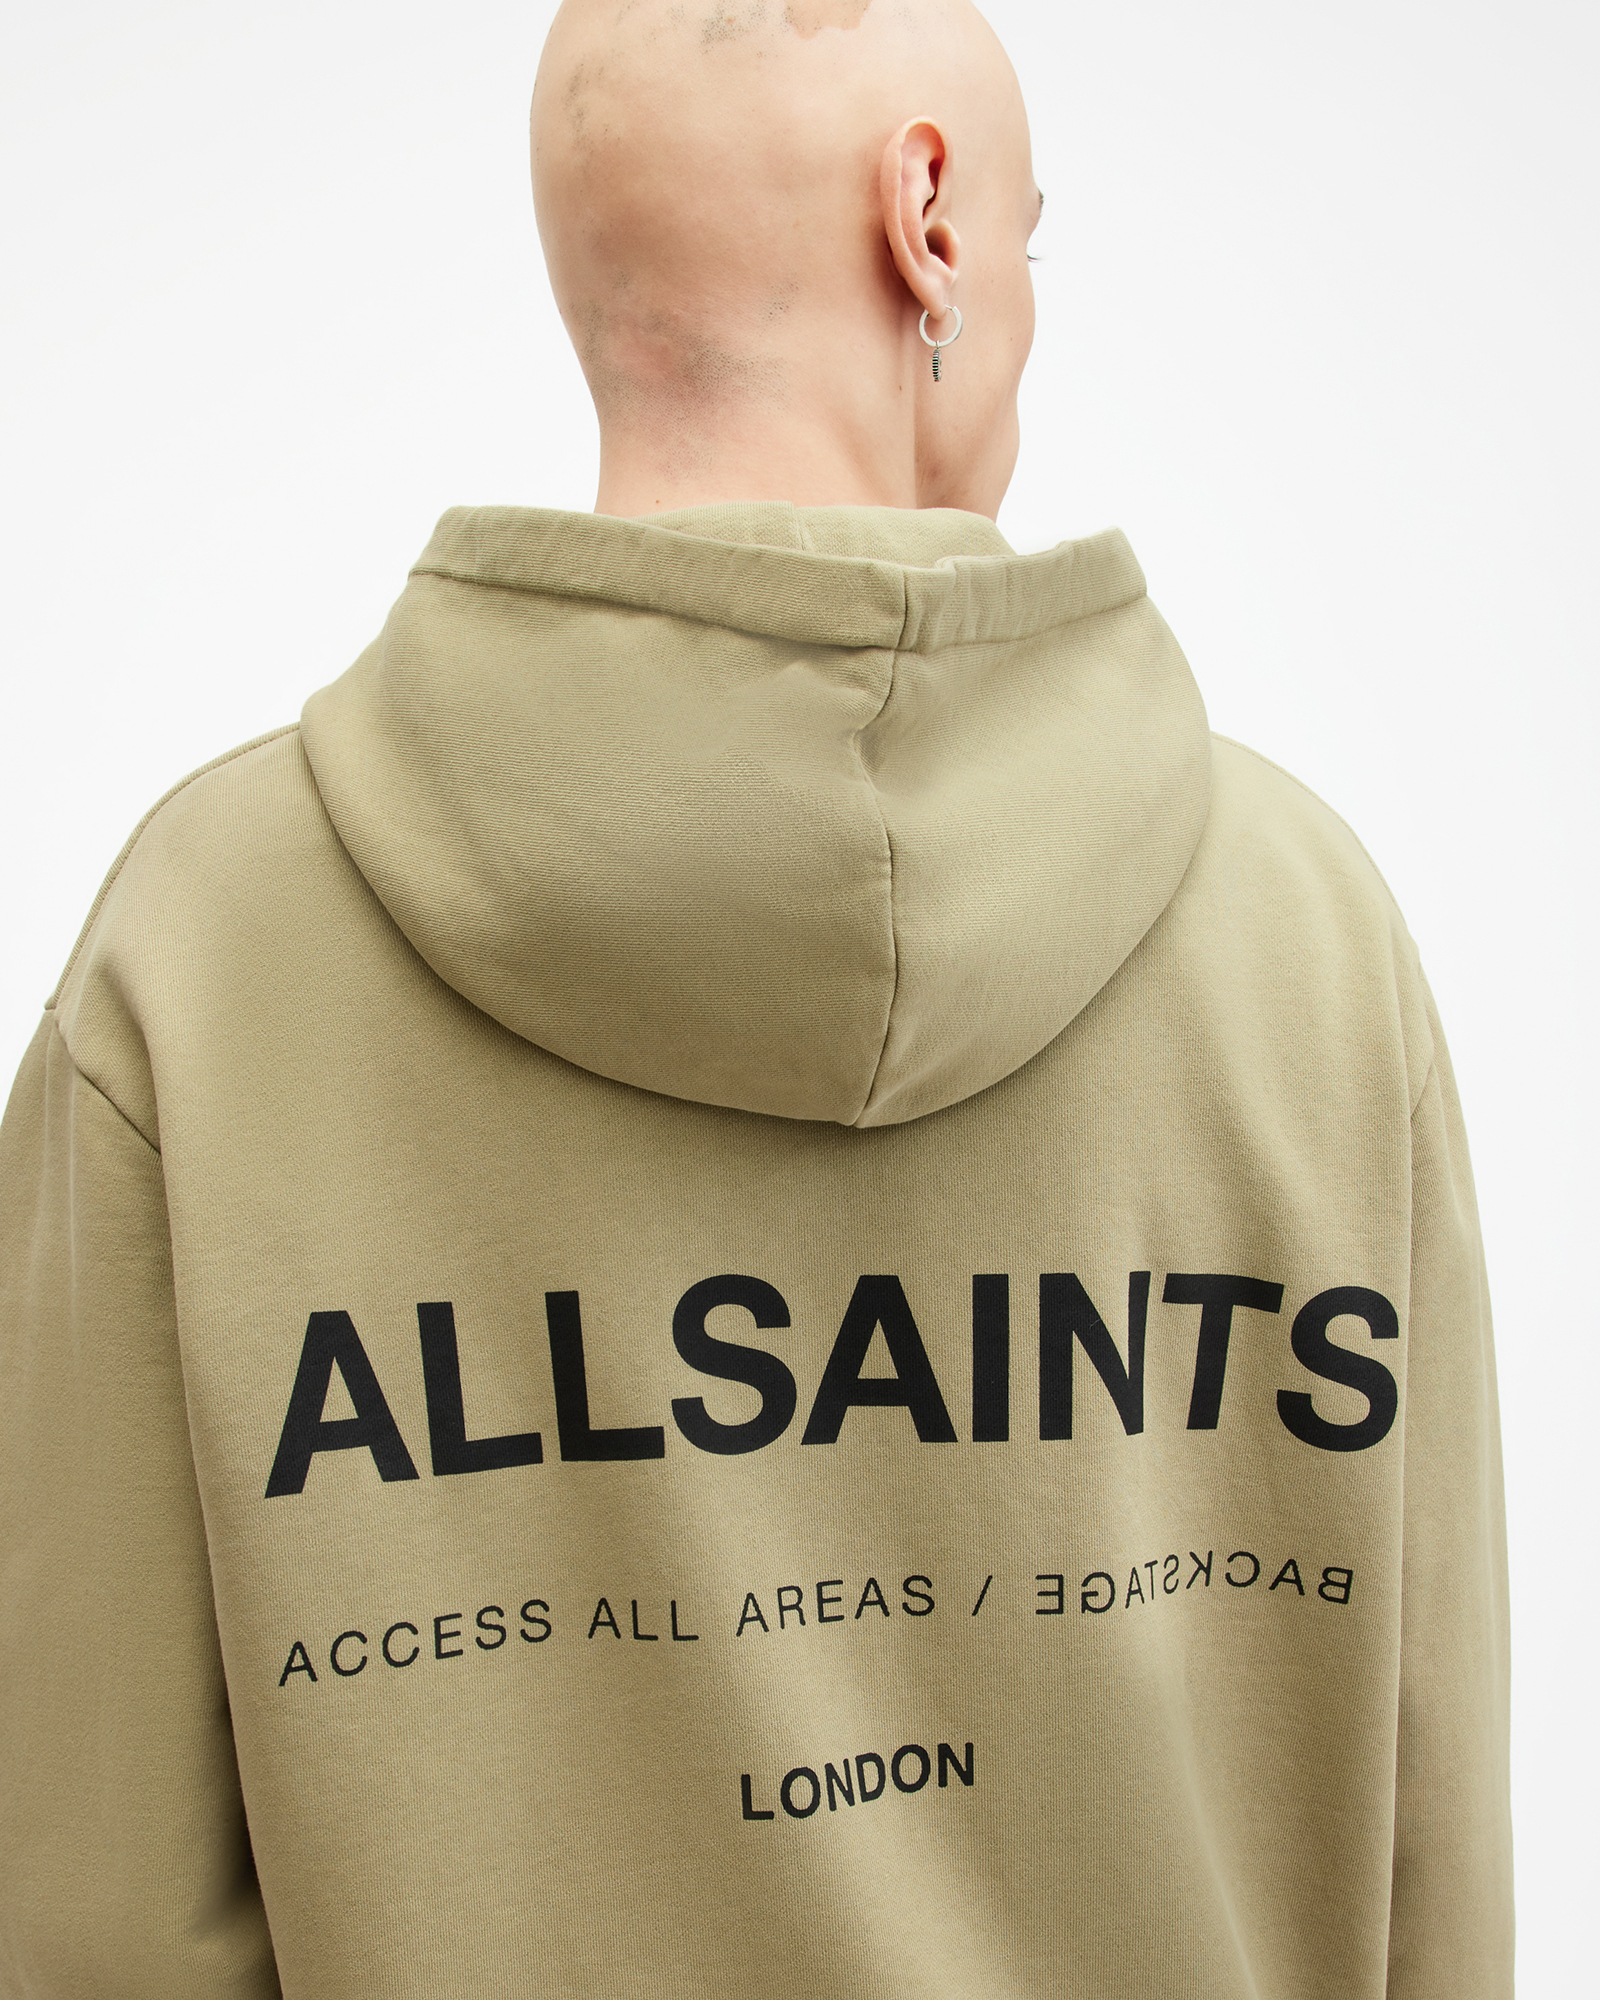 AllSaints Access Relaxed Fit Logo Hoodie,, HERB GREEN